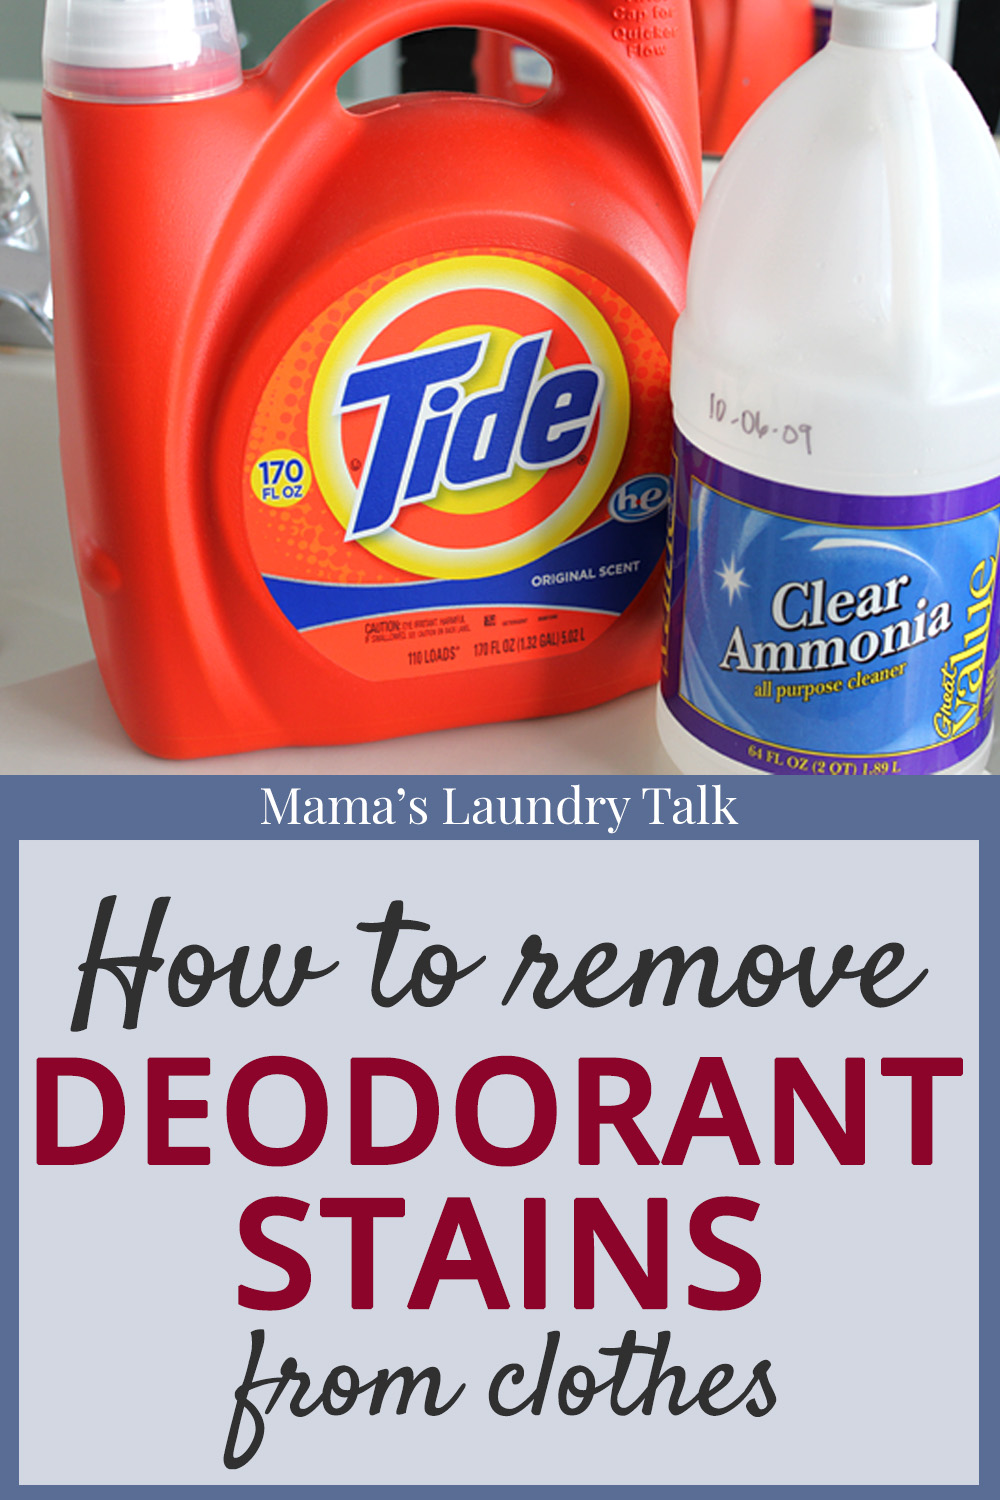 to Remove Stains from Clothes - Mama's Laundry Talk